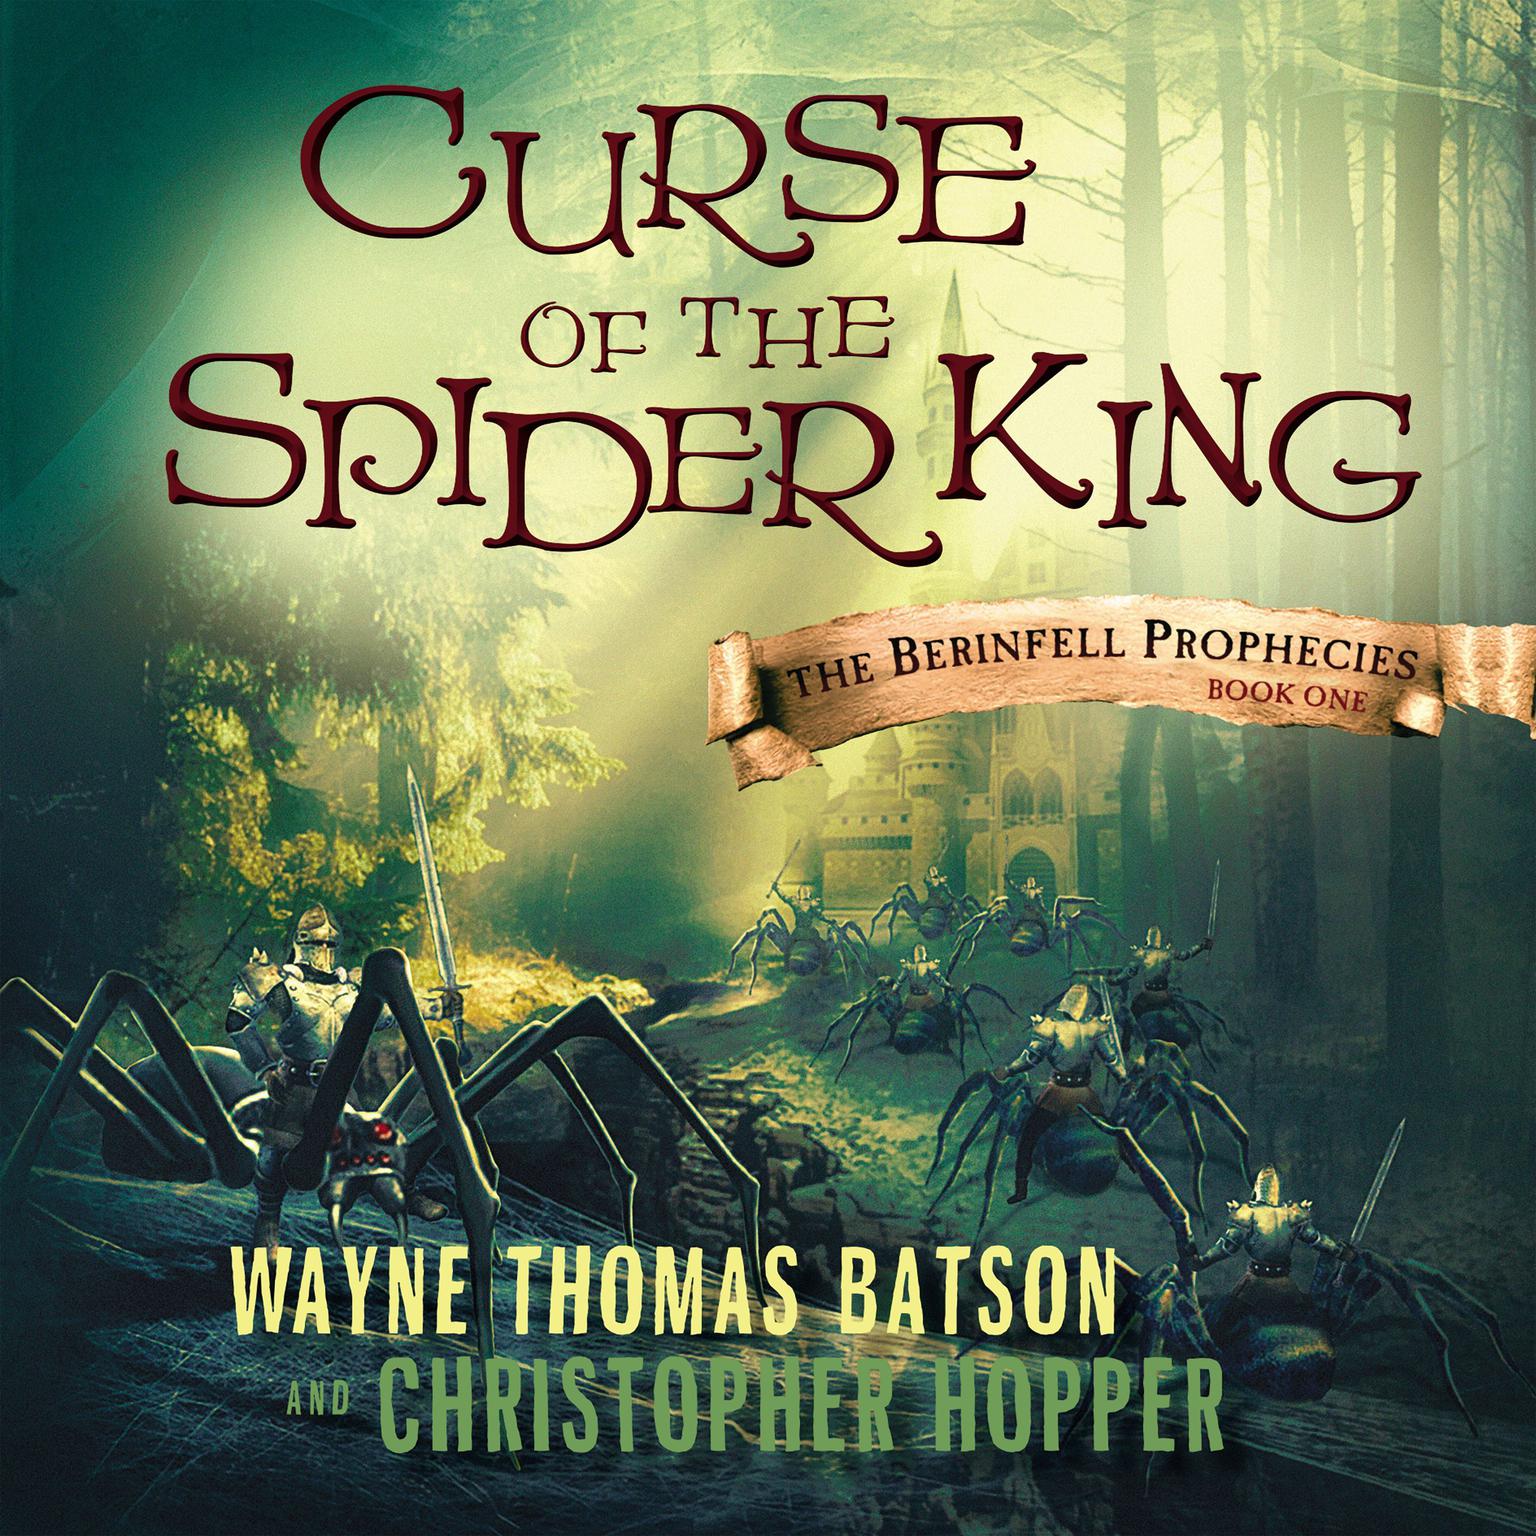 Curse of the Spider King: The Berinfell Prophecies Series - Book One Audiobook, by Wayne Thomas Batson